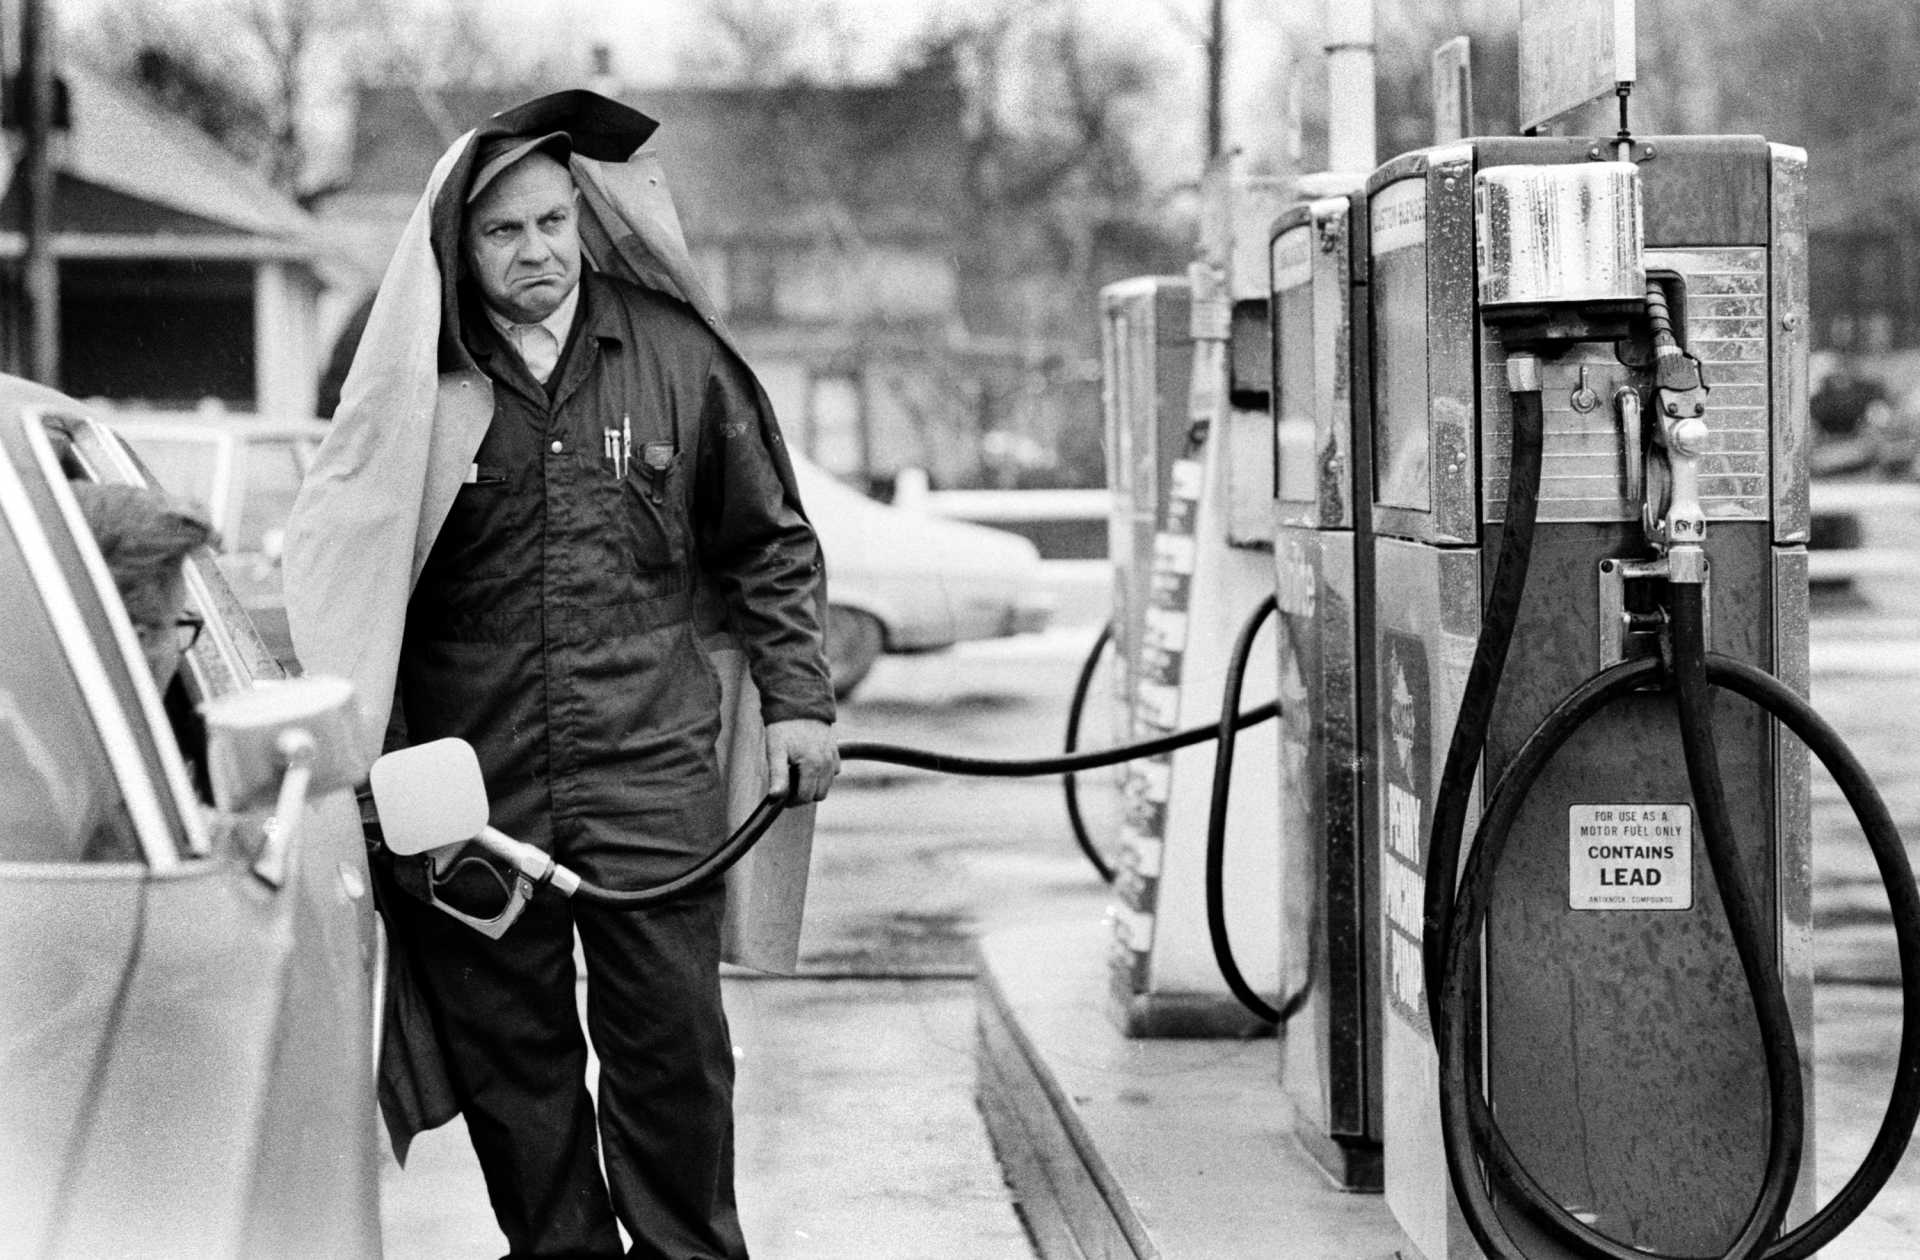 A grumpy gas station attendant protects himself from the rain. 1979.